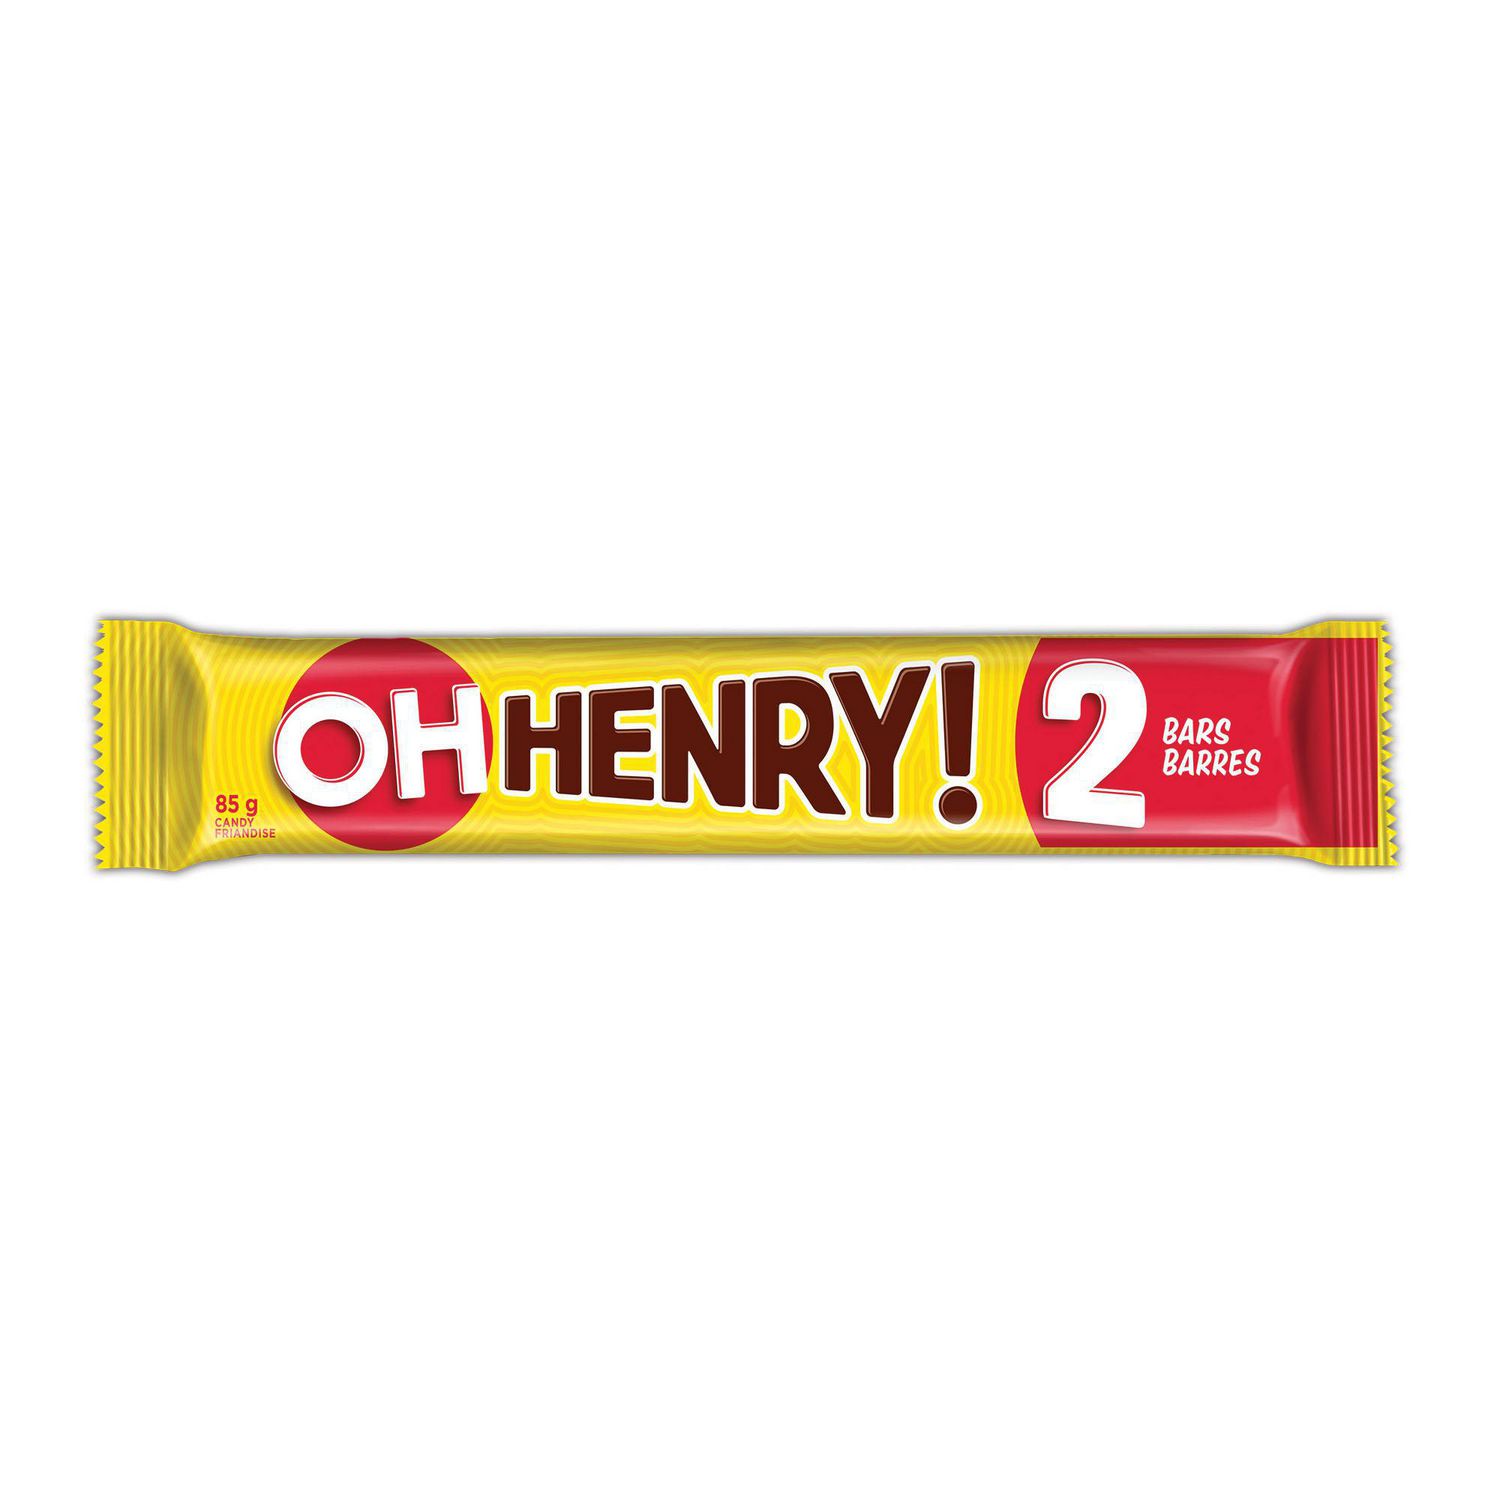 OH HENRY! Chocolate King Size Candy Bar, 85g